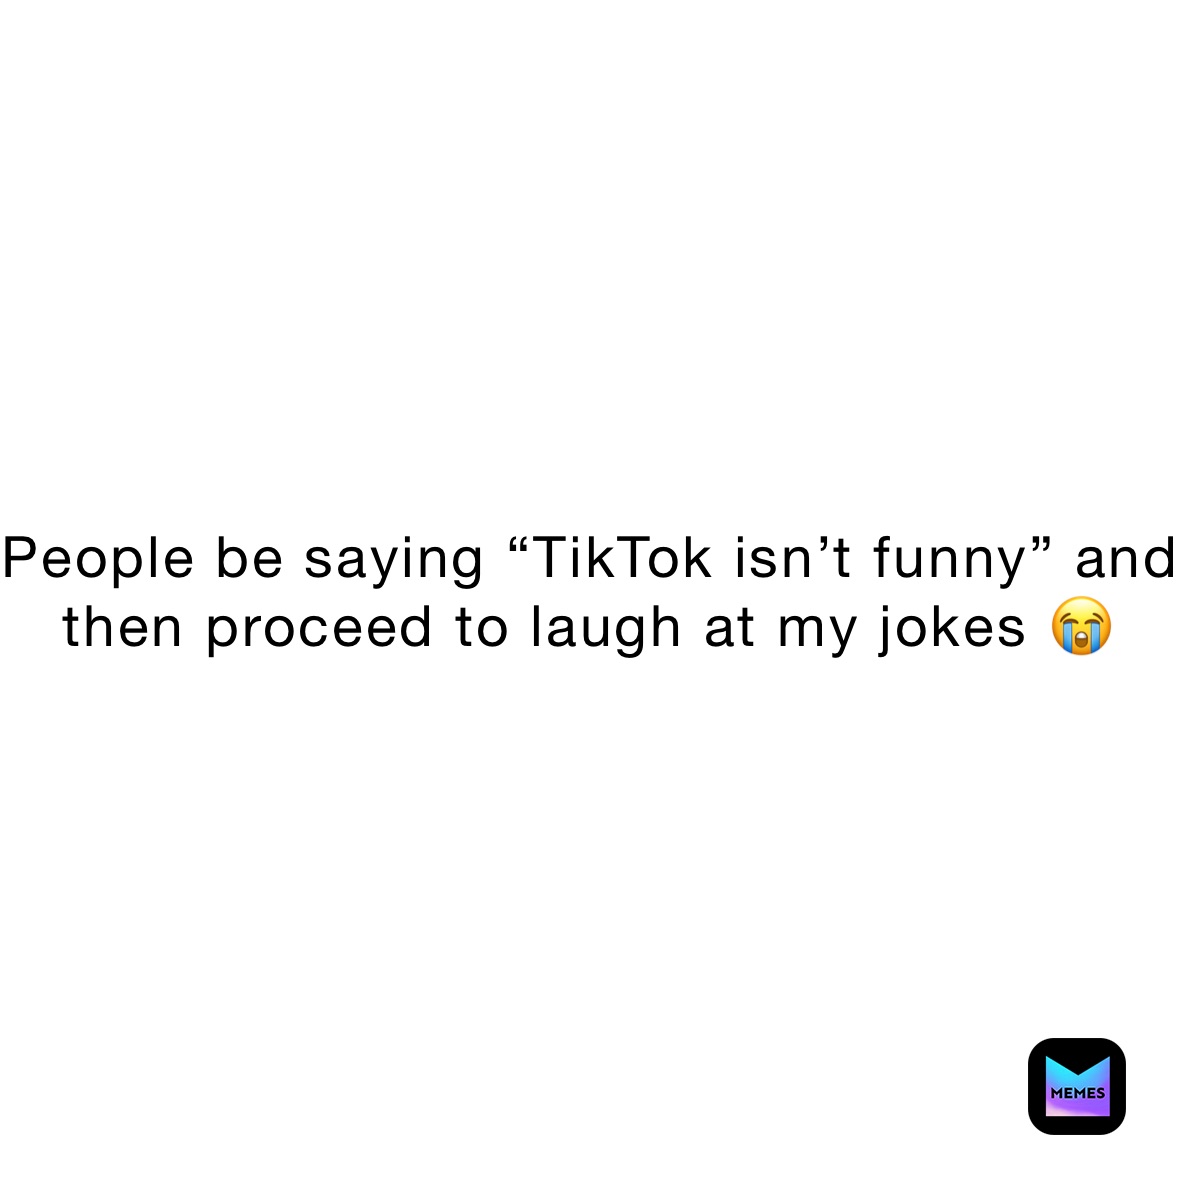 People be saying “TikTok isn’t funny” and then proceed to laugh at my jokes 😭